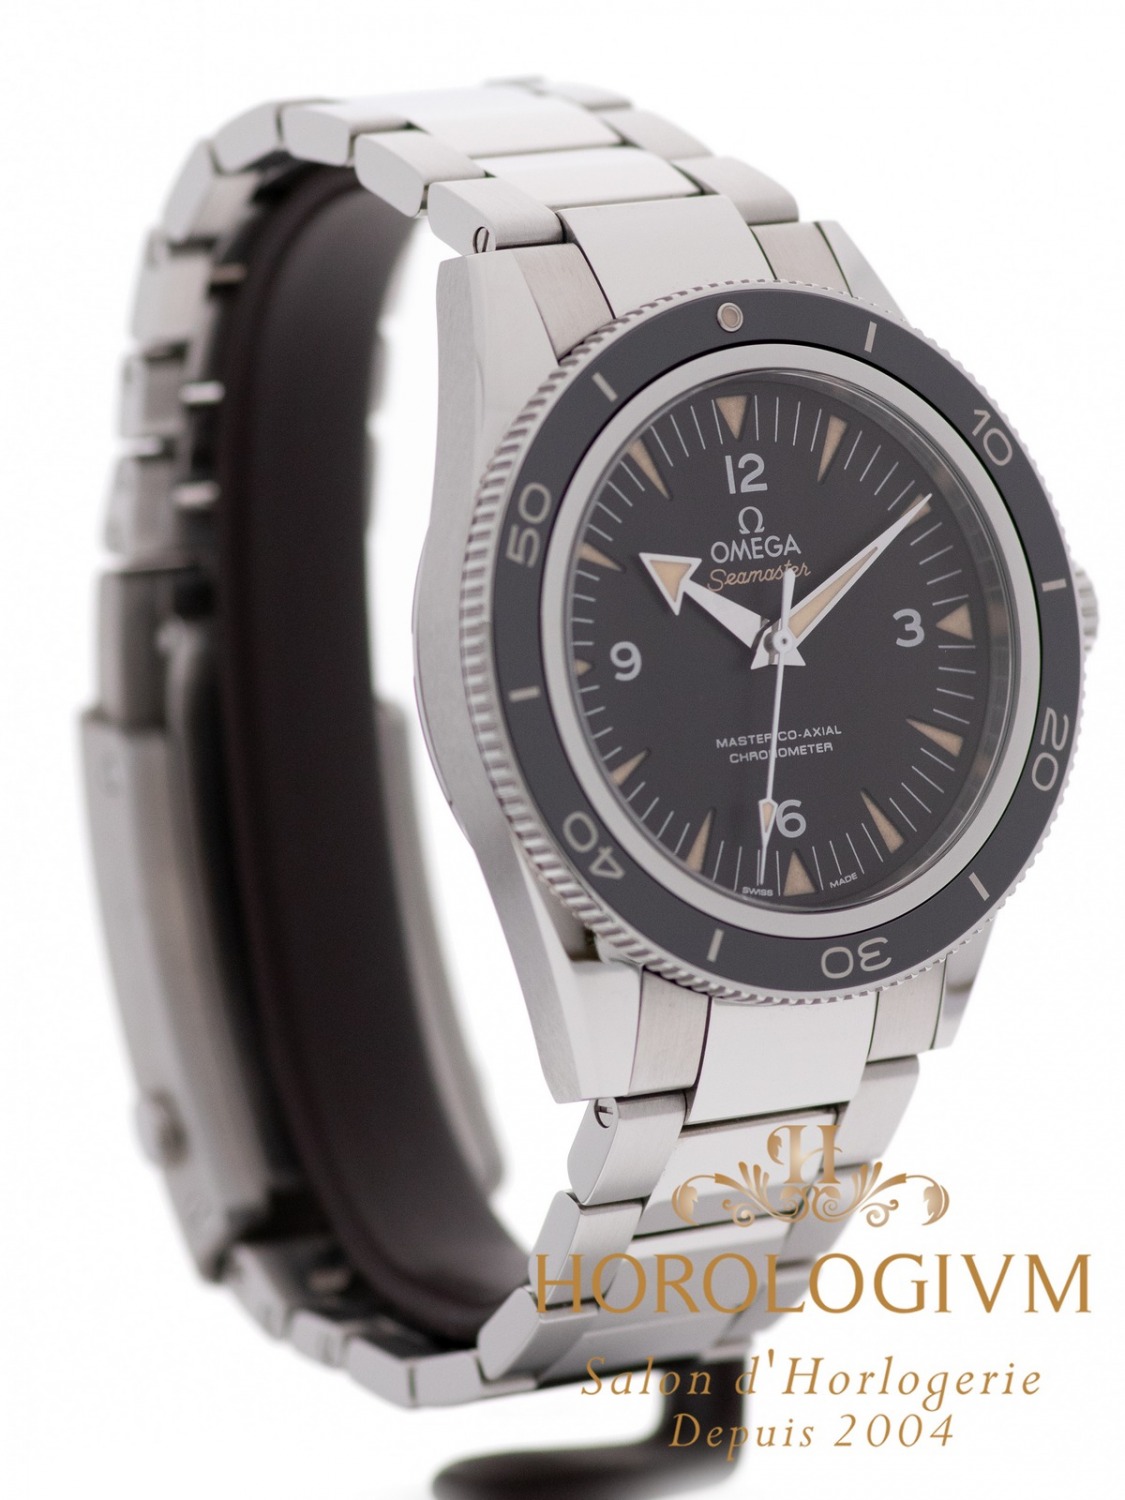 Omega Seamaster 300 41MM watch, silver (case) and black (bezel)